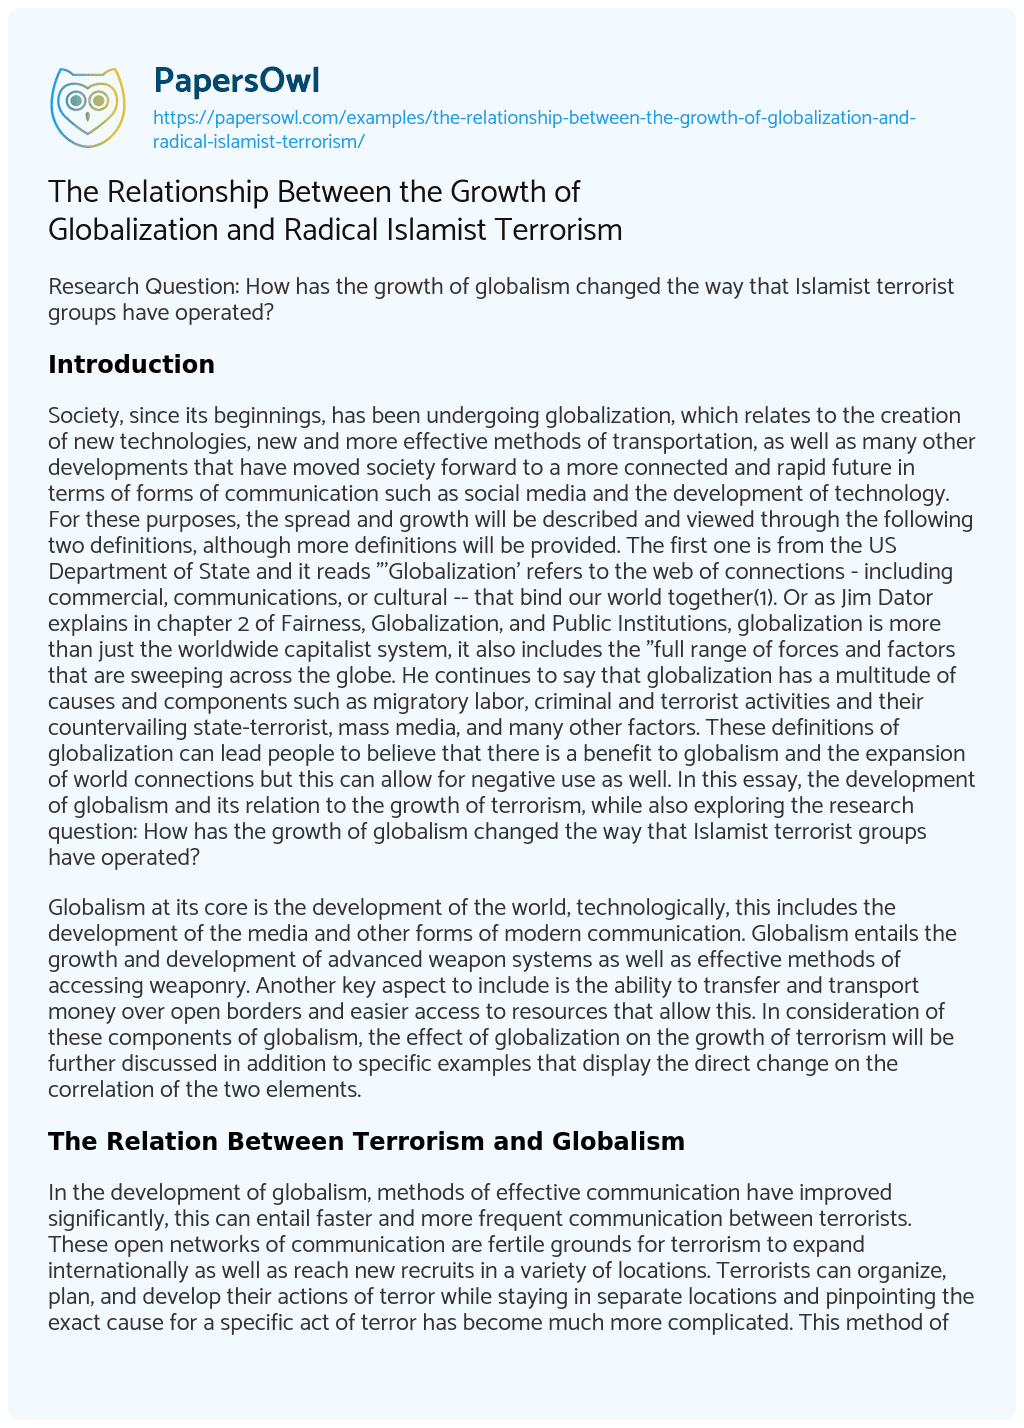 Essay on The Relationship between the Growth of Globalization and Radical Islamist Terrorism